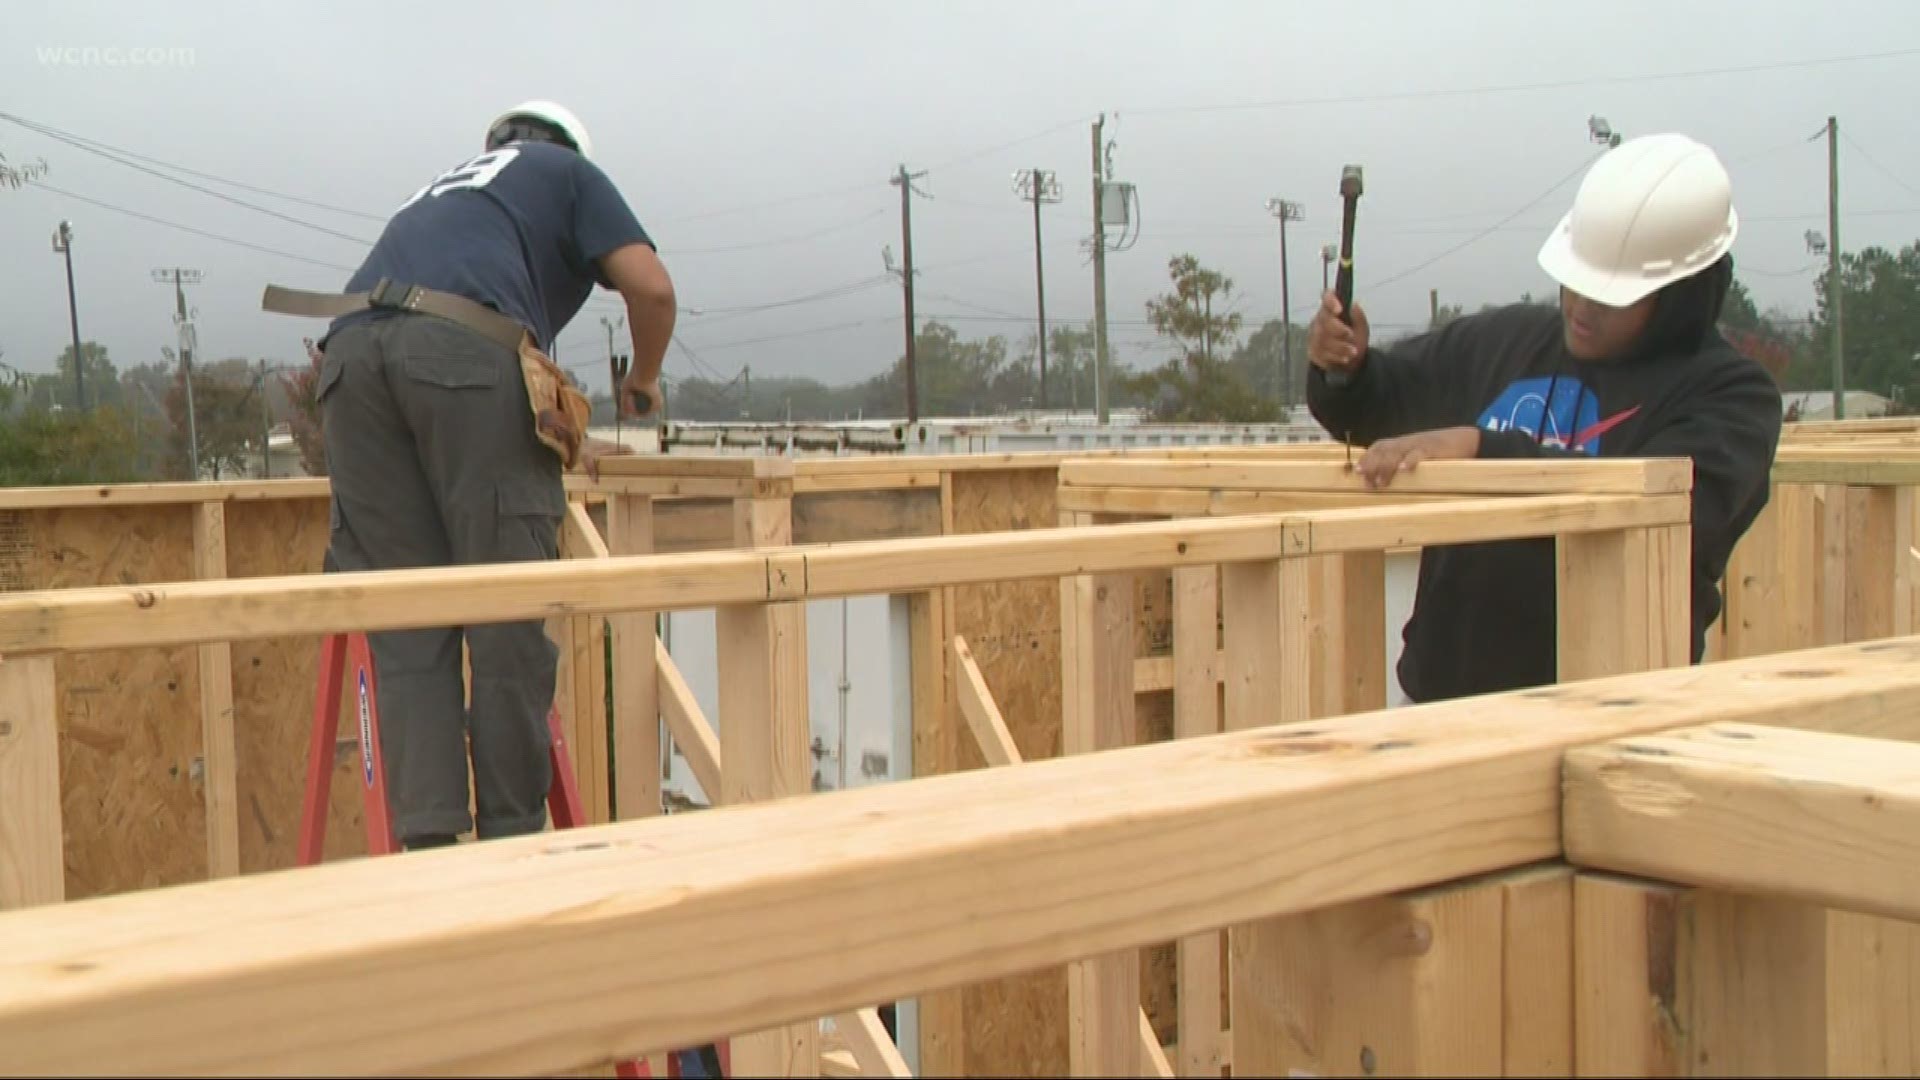 It's a trade program with a community outcome. Charlotte high school students are building a Habitat for Humanity home as hands-on training for the workforce.